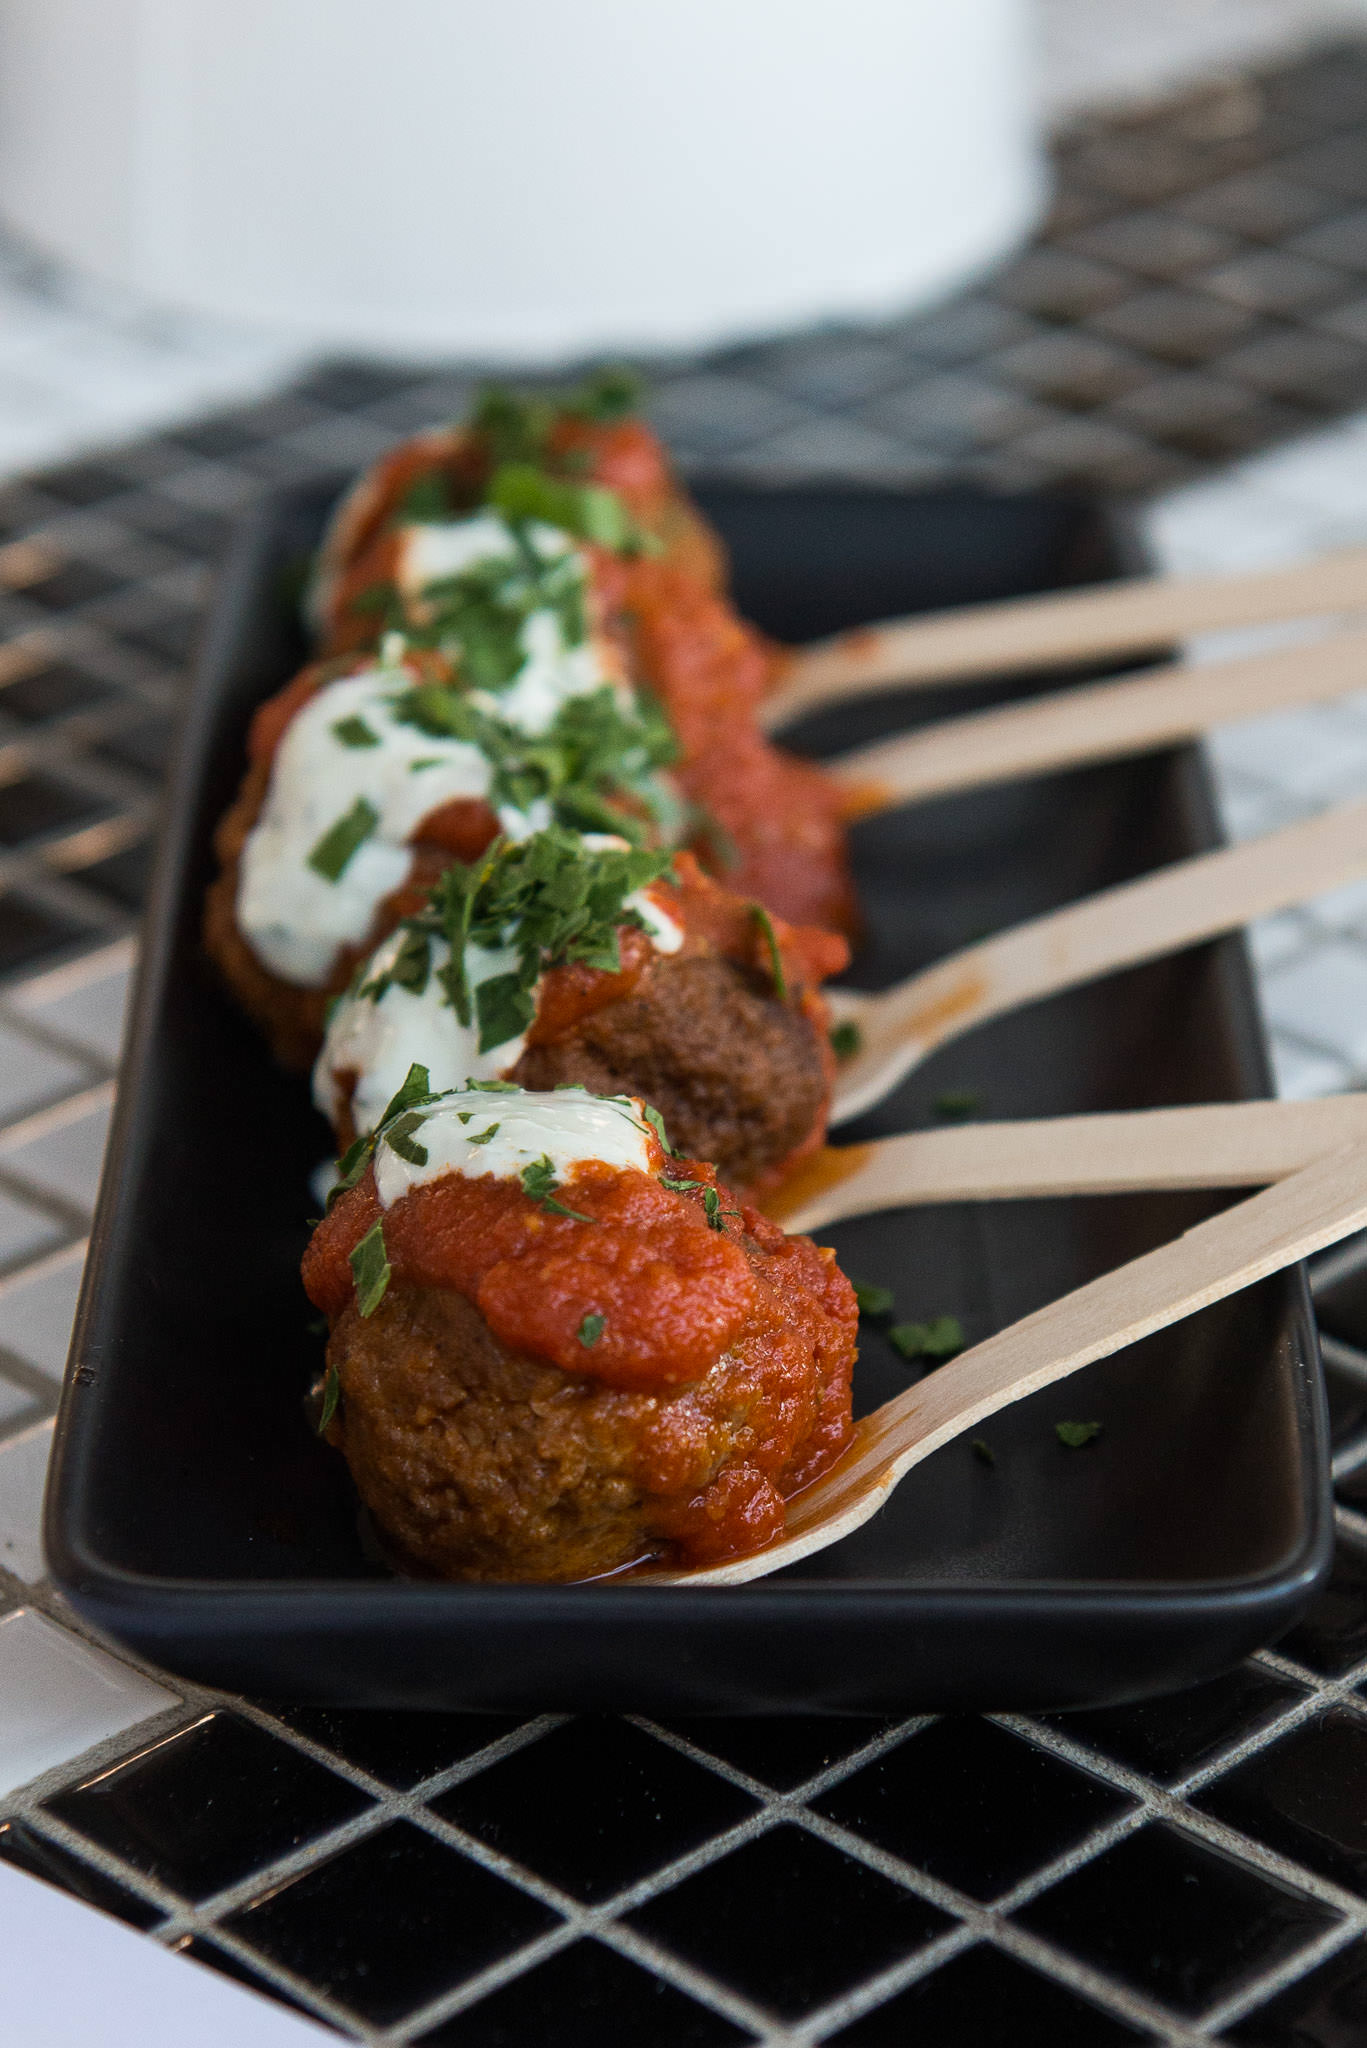 Spicy lamb meatballs with tomato sauce and yoghurt (AU$9)